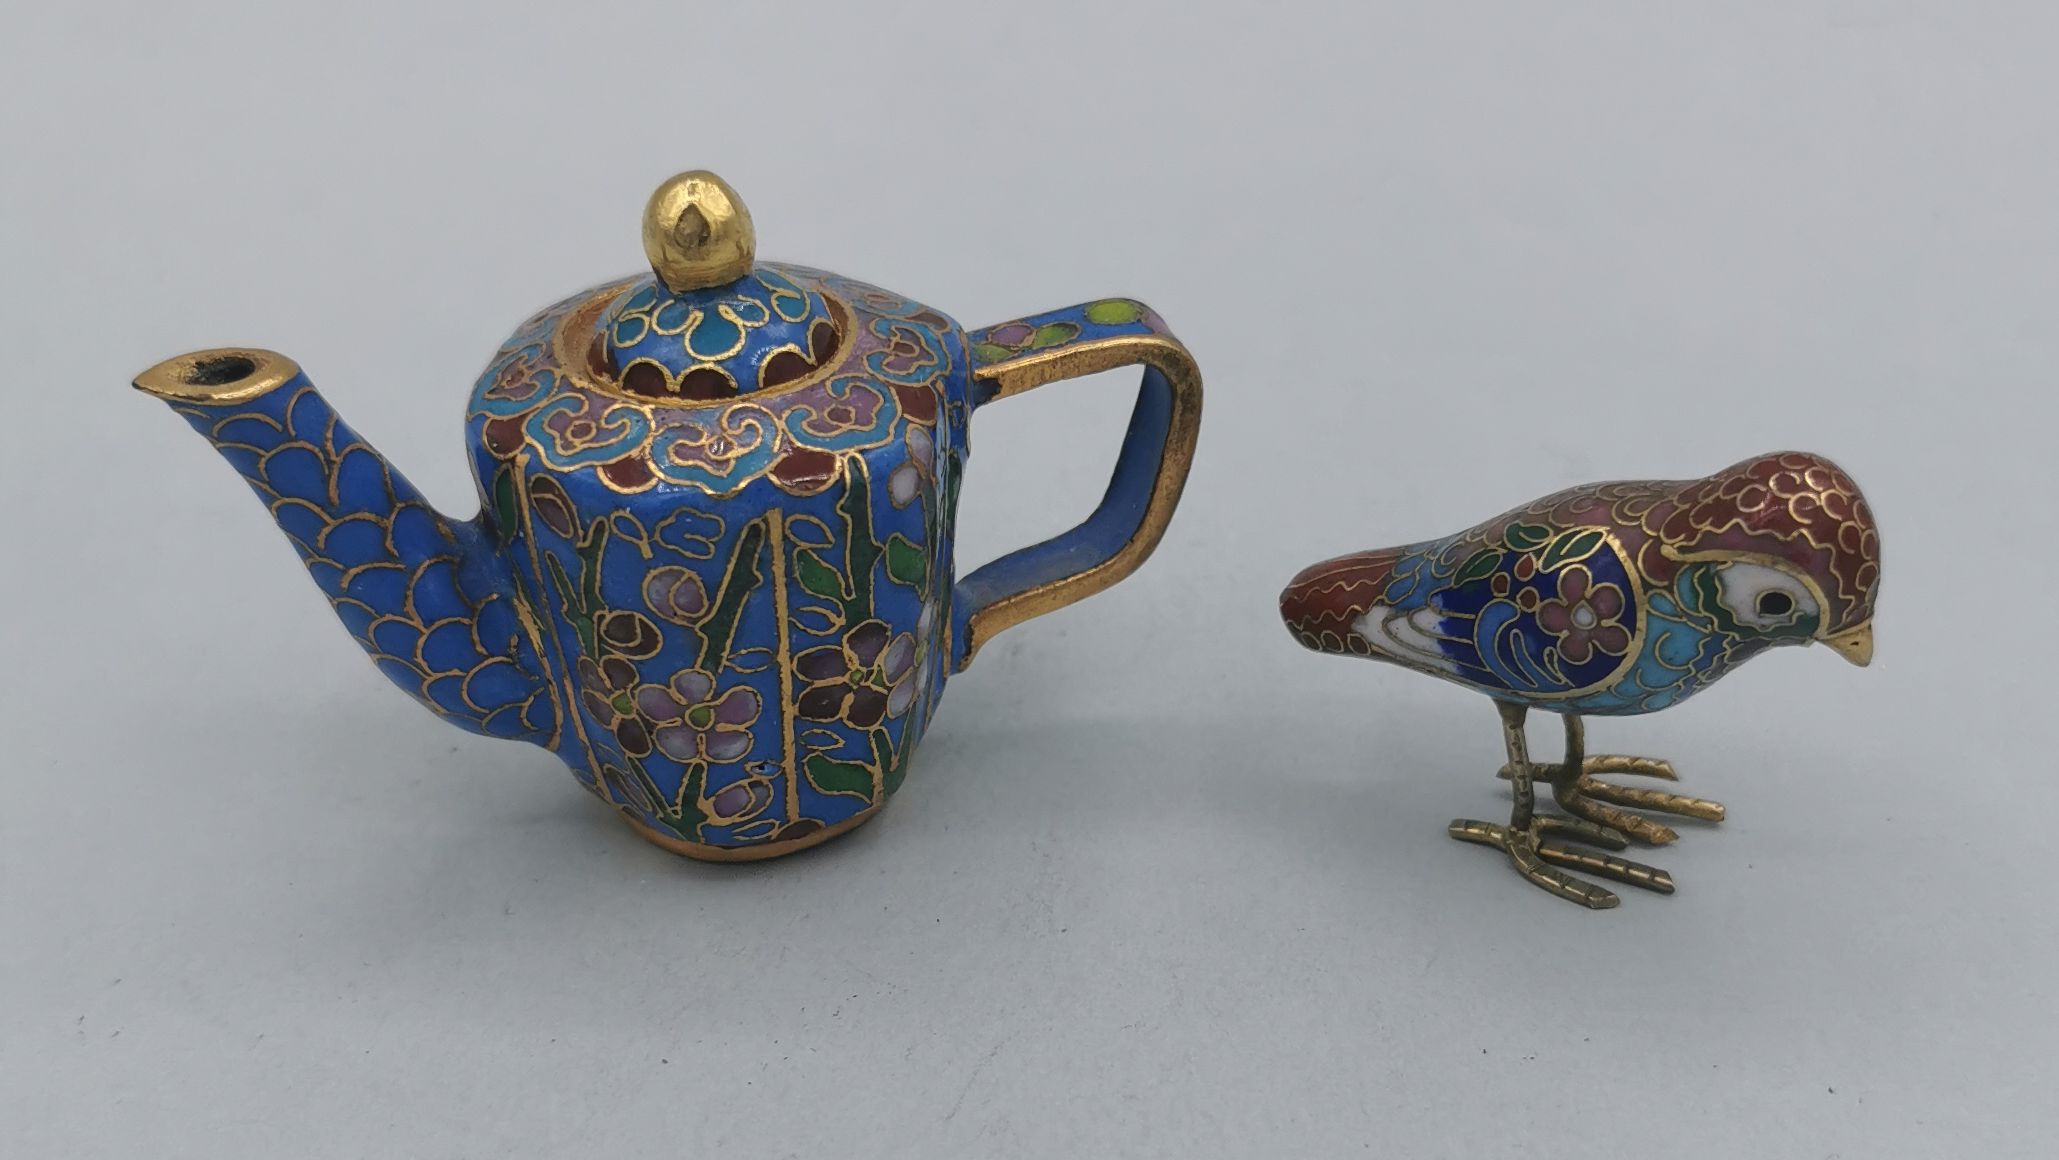 10 MINIATURE CLOISONNE OBJECTS - Image 13 of 15